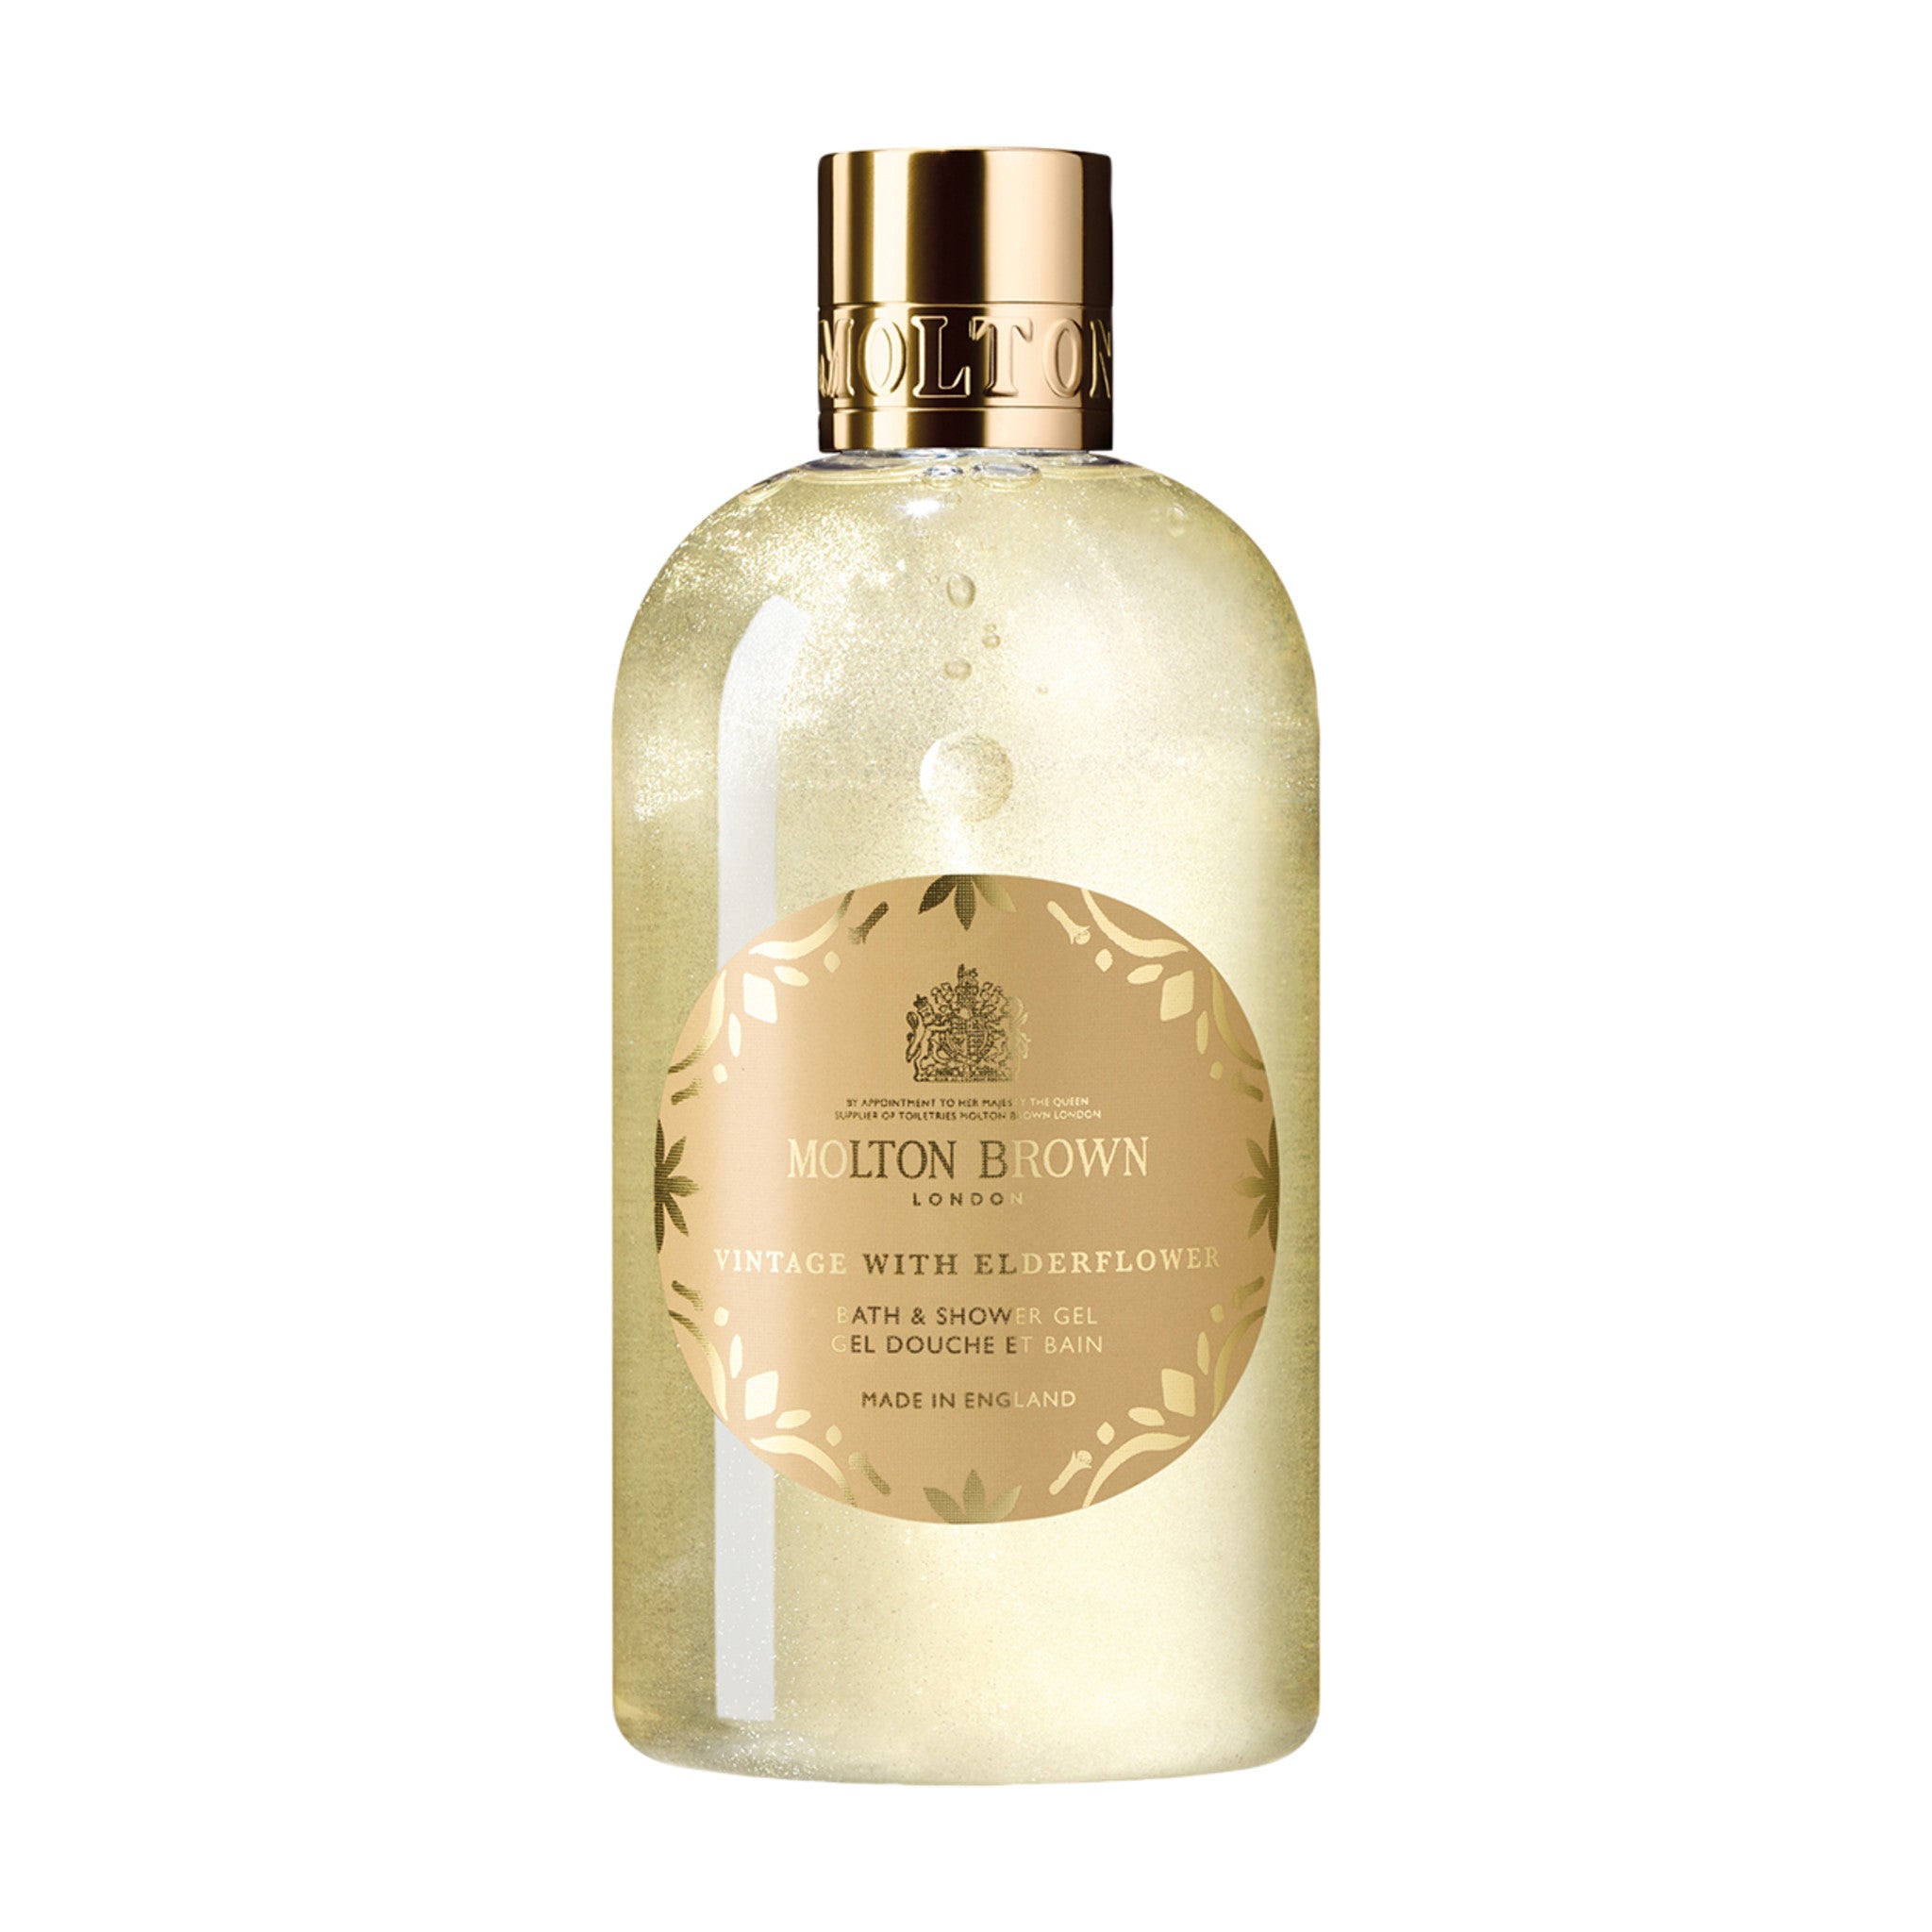 Molton Brown Vintage With Elderflower Bath and Shower Gel (Limited Edition) main image.